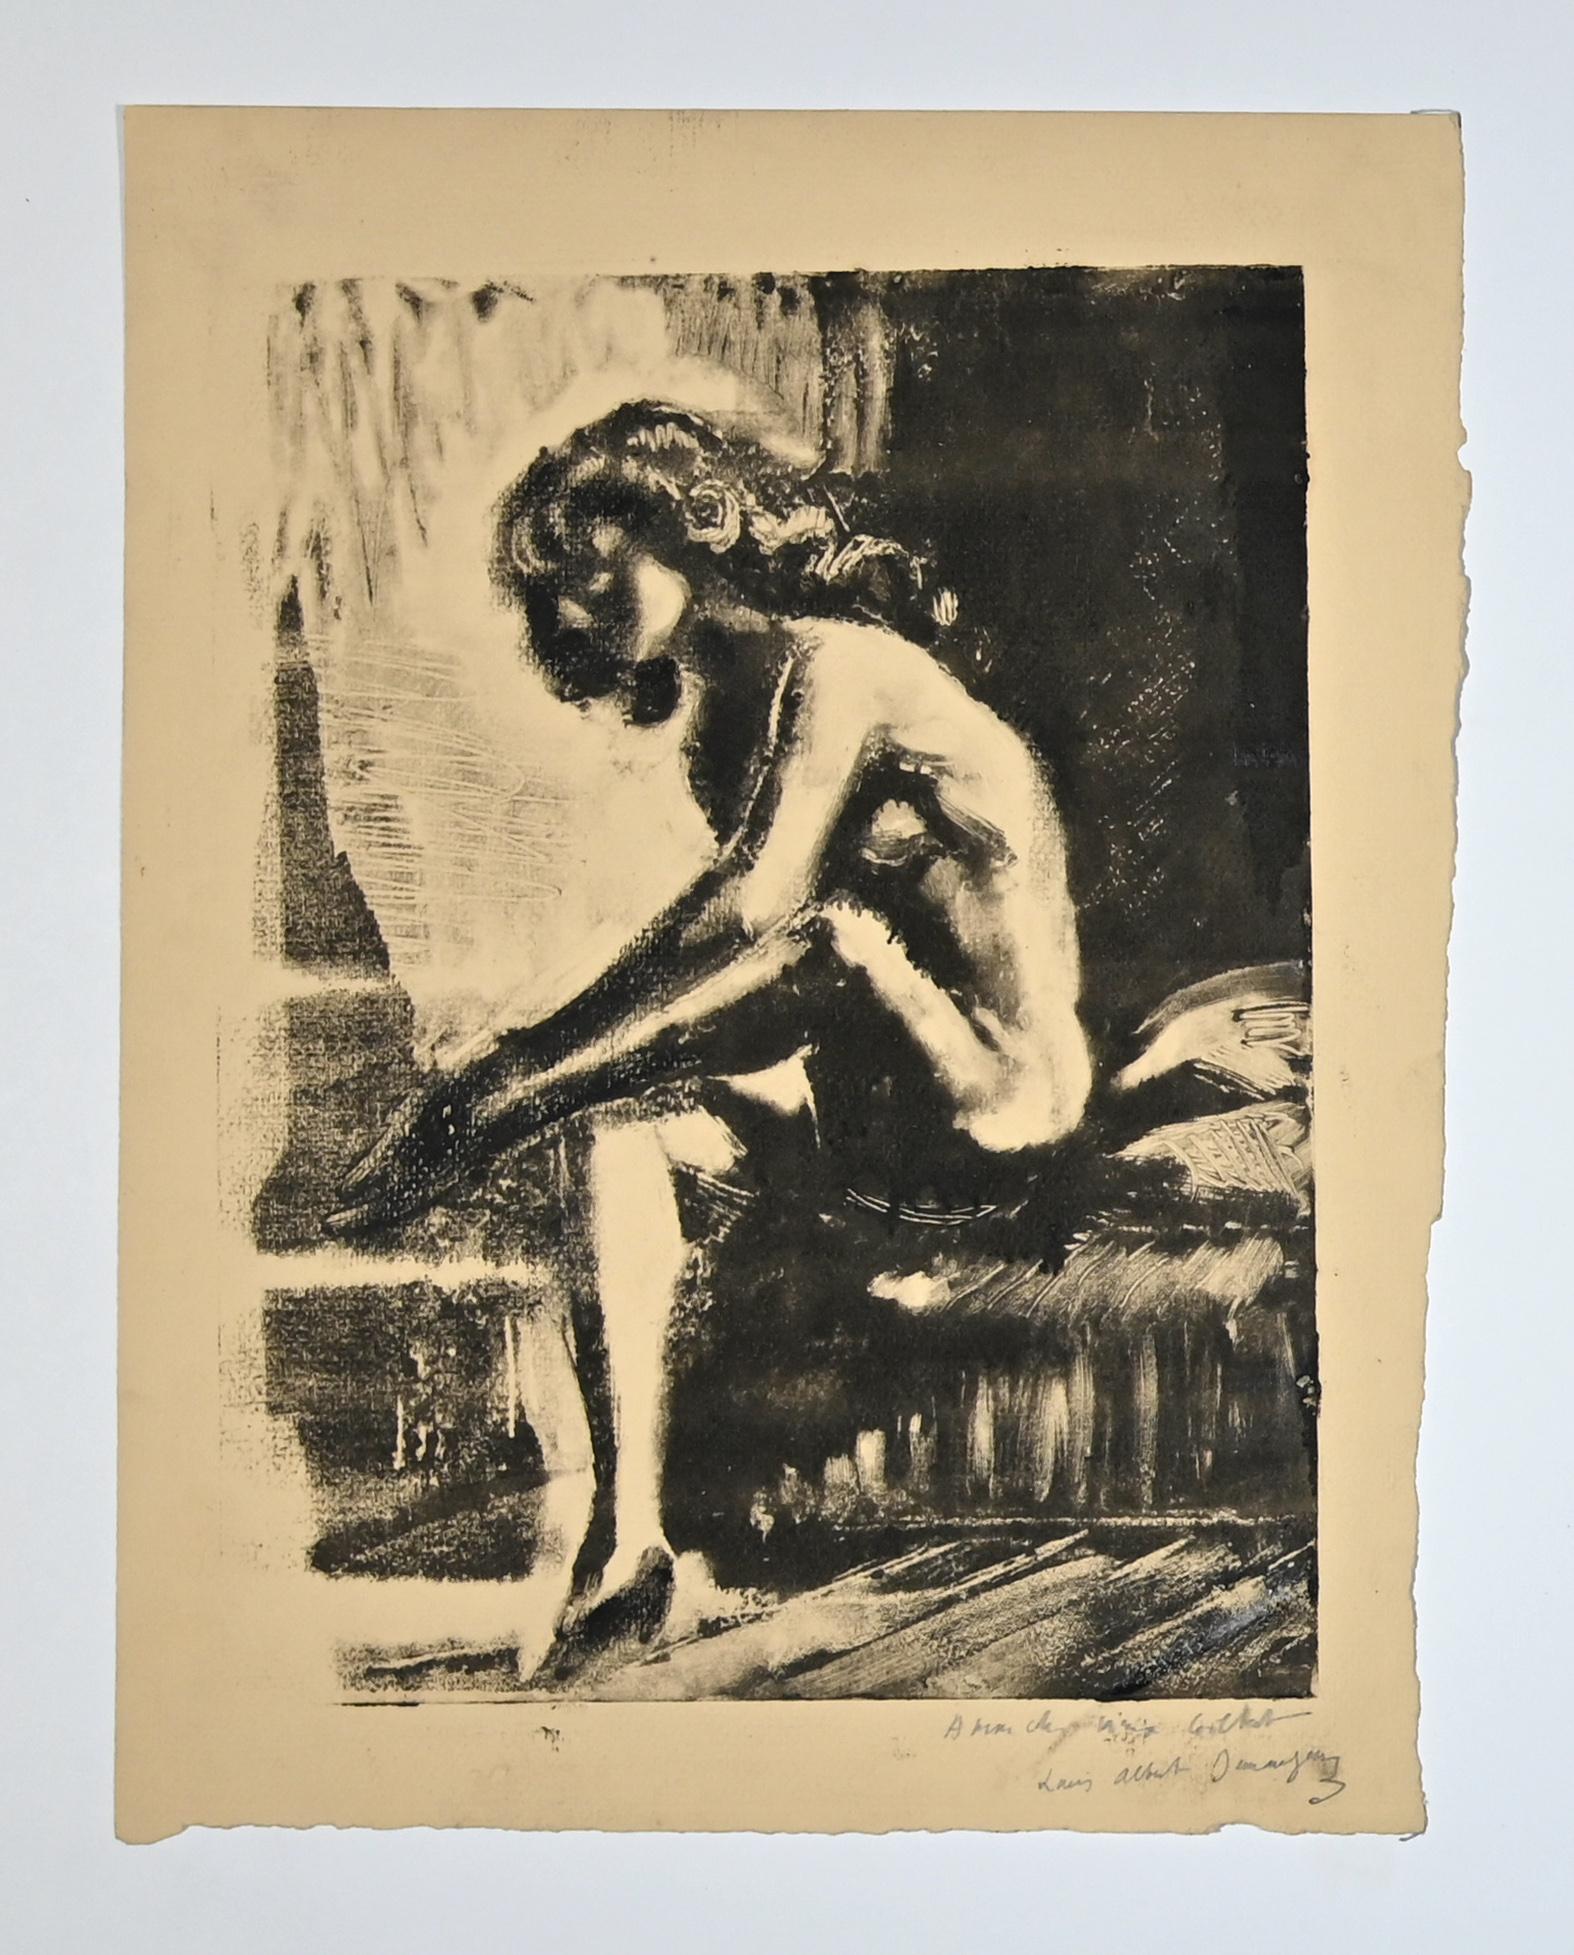 Nude is a Monotype print realized by Louis-Albert Demangeon in the mid-20th century.

Hand-signed

In Good condition.

The artwork is depicted through soft strokes in a well-balanced composition.